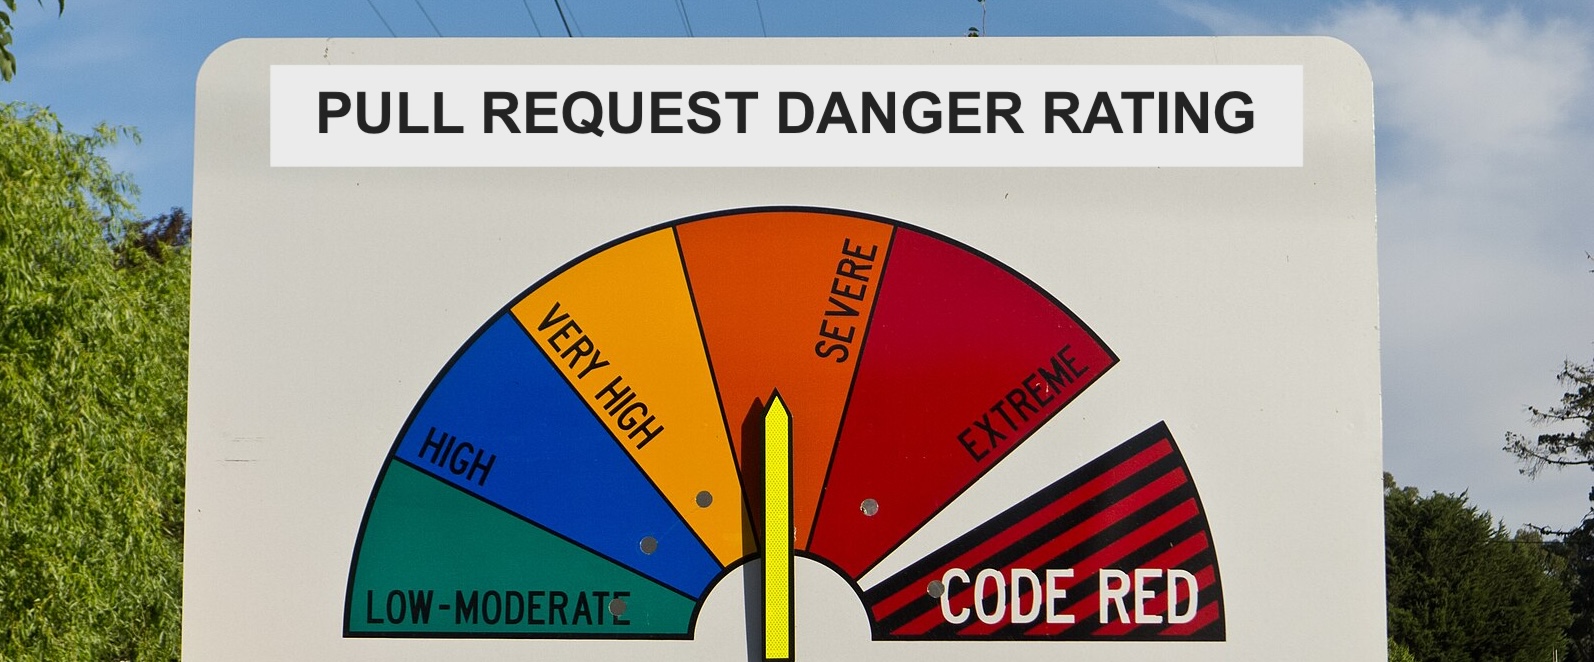 A fire danger rating sign with the text "PULL REQUEST DANGER RATING" across the top. These signs are common in towns acros Australia to indicate the risk of bushfire on the current day. Original source: https://upload.wikimedia.org/wikipedia/commons/0/01/Fire_danger_rating_sign.jpg